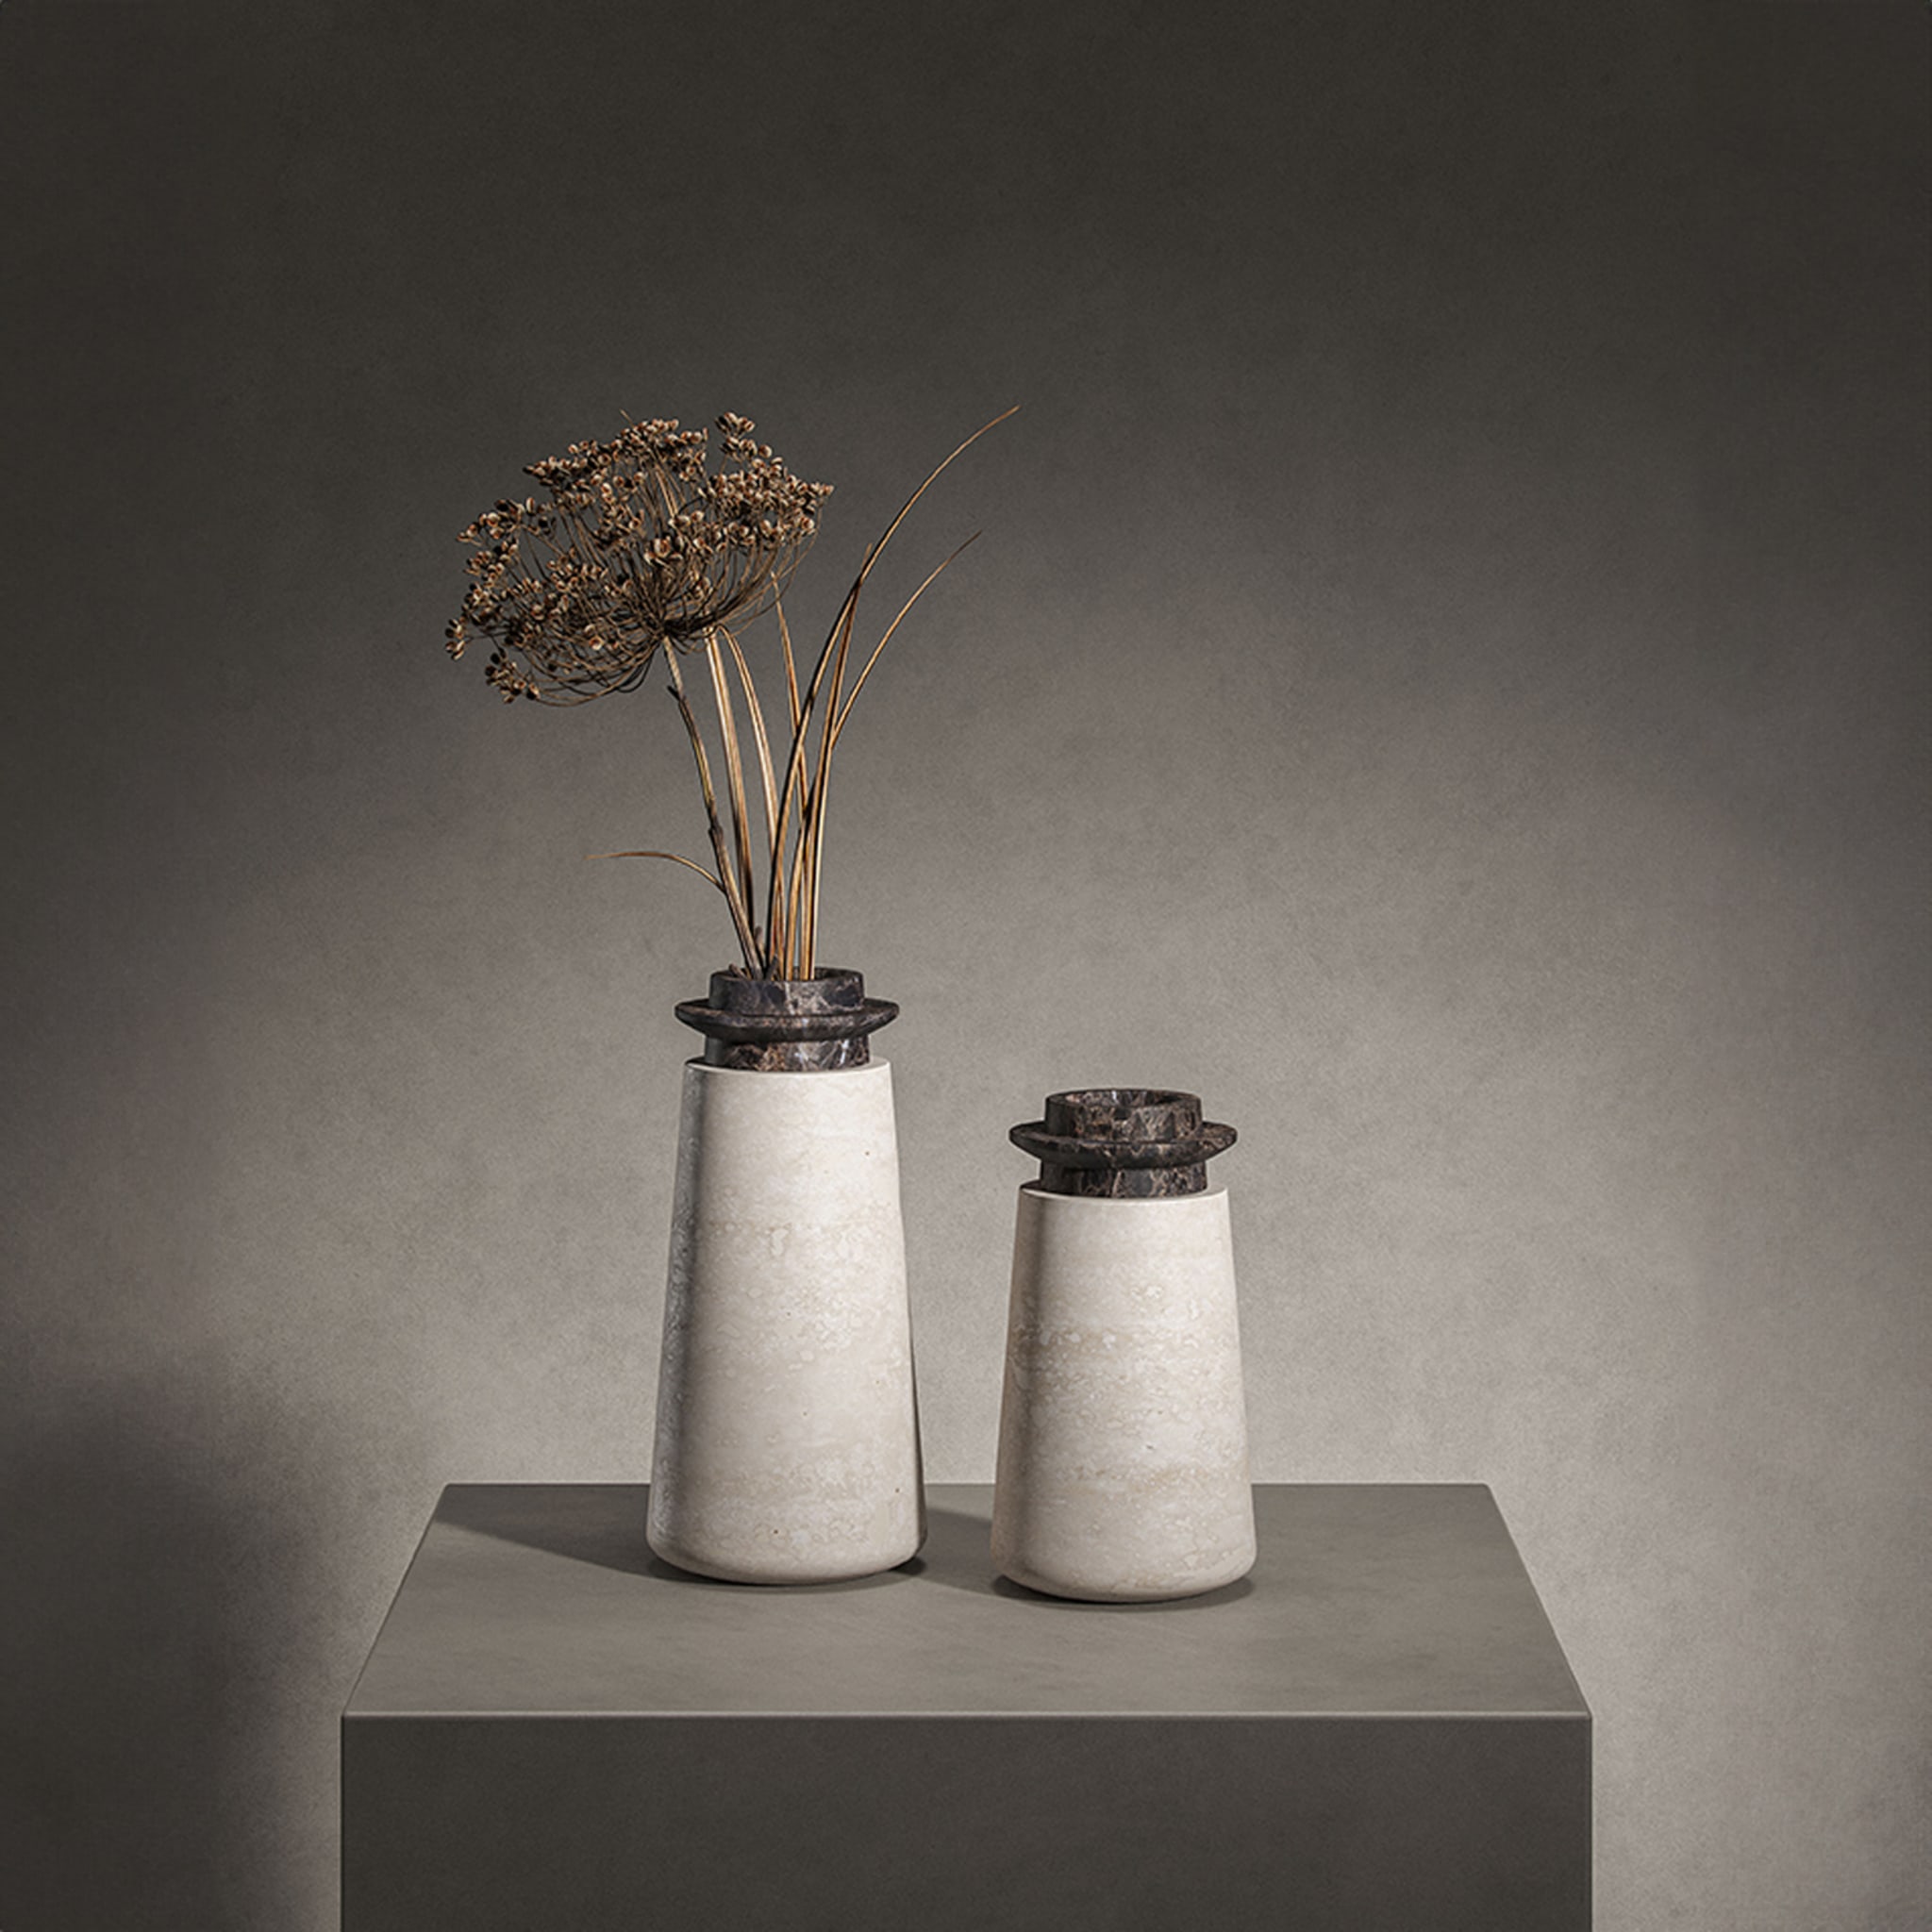 Tivoli Large Vase in Travertine and marble by Ivan Colominas - Alternative view 2